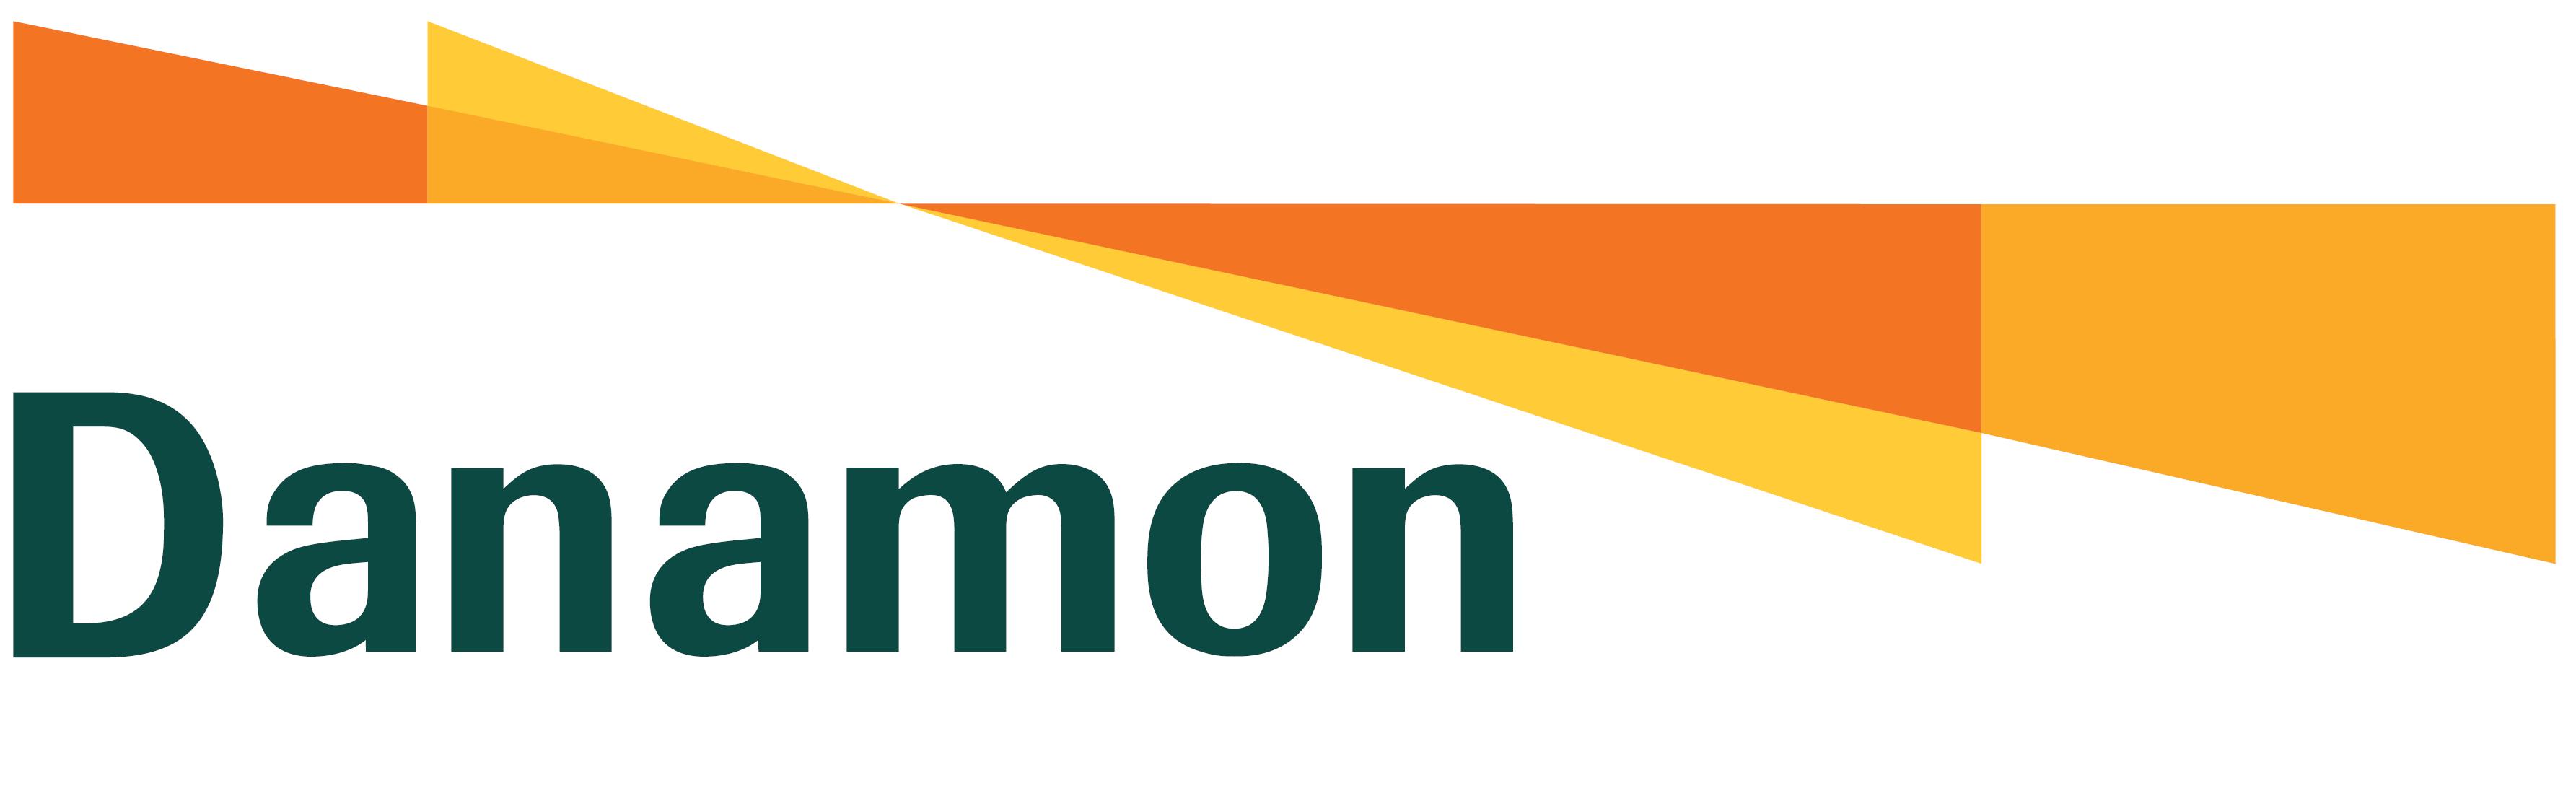 Danamon Improves User Experience with always available, fast, and